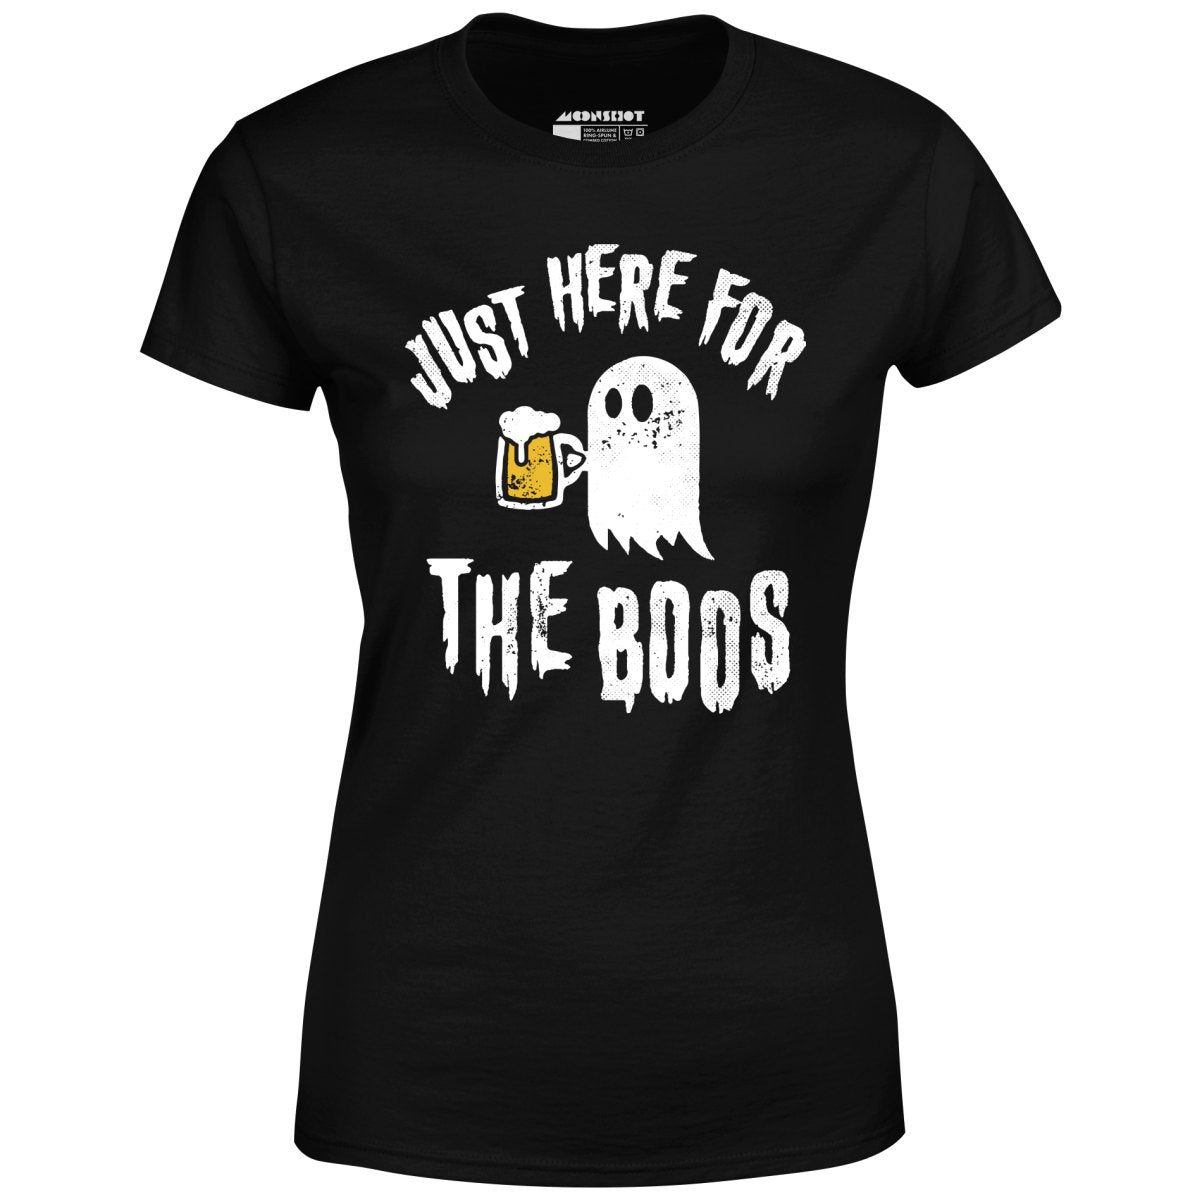 Just Here for the Boos - Women's T-Shirt